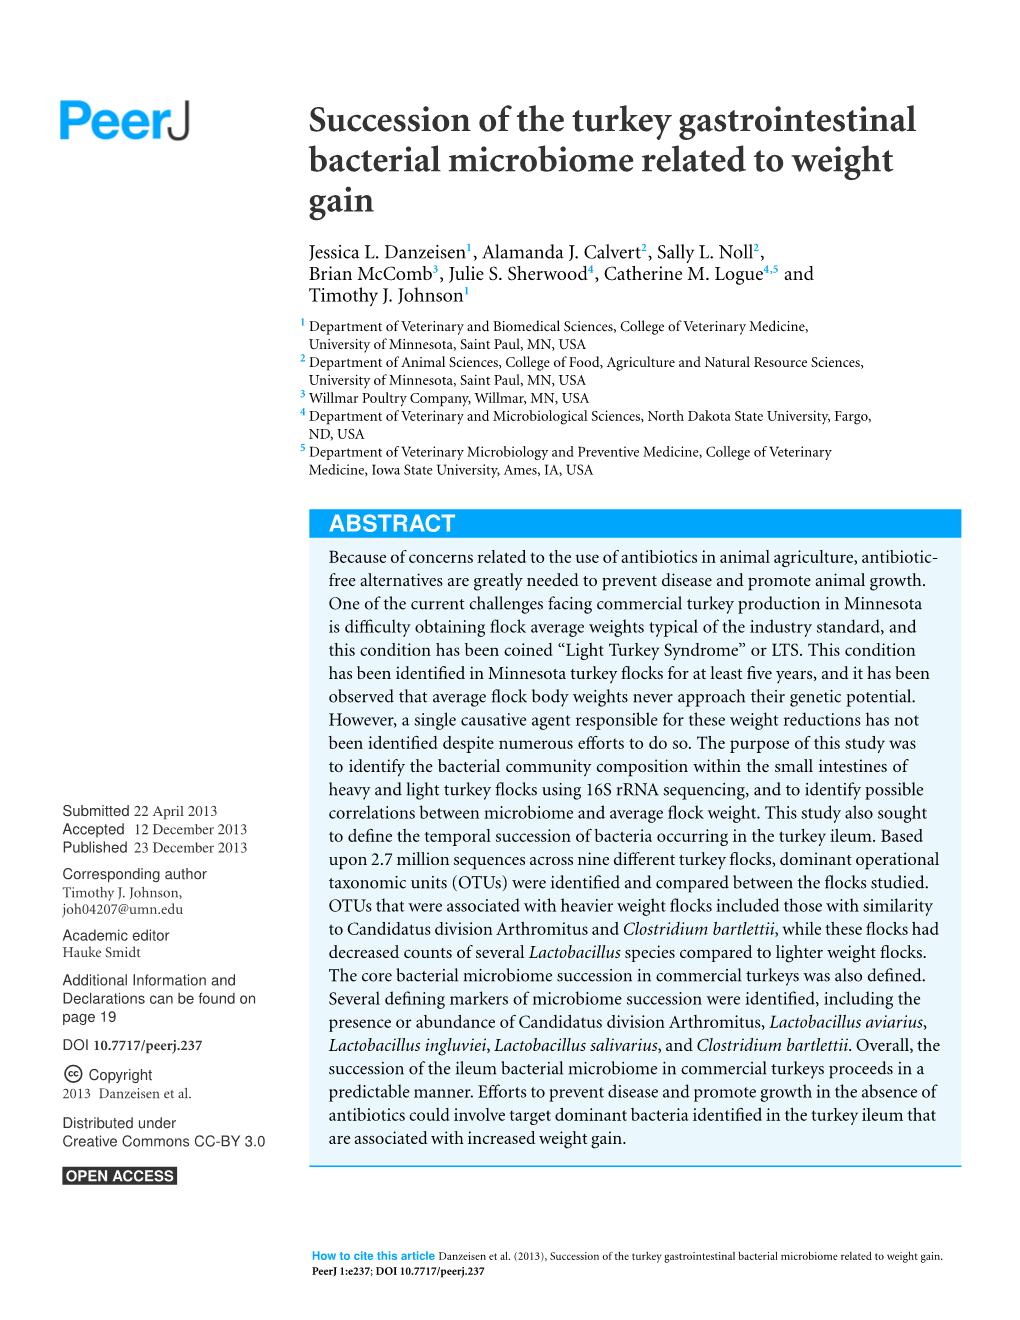 Succession of the Turkey Gastrointestinal Bacterial Microbiome Related to Weight Gain